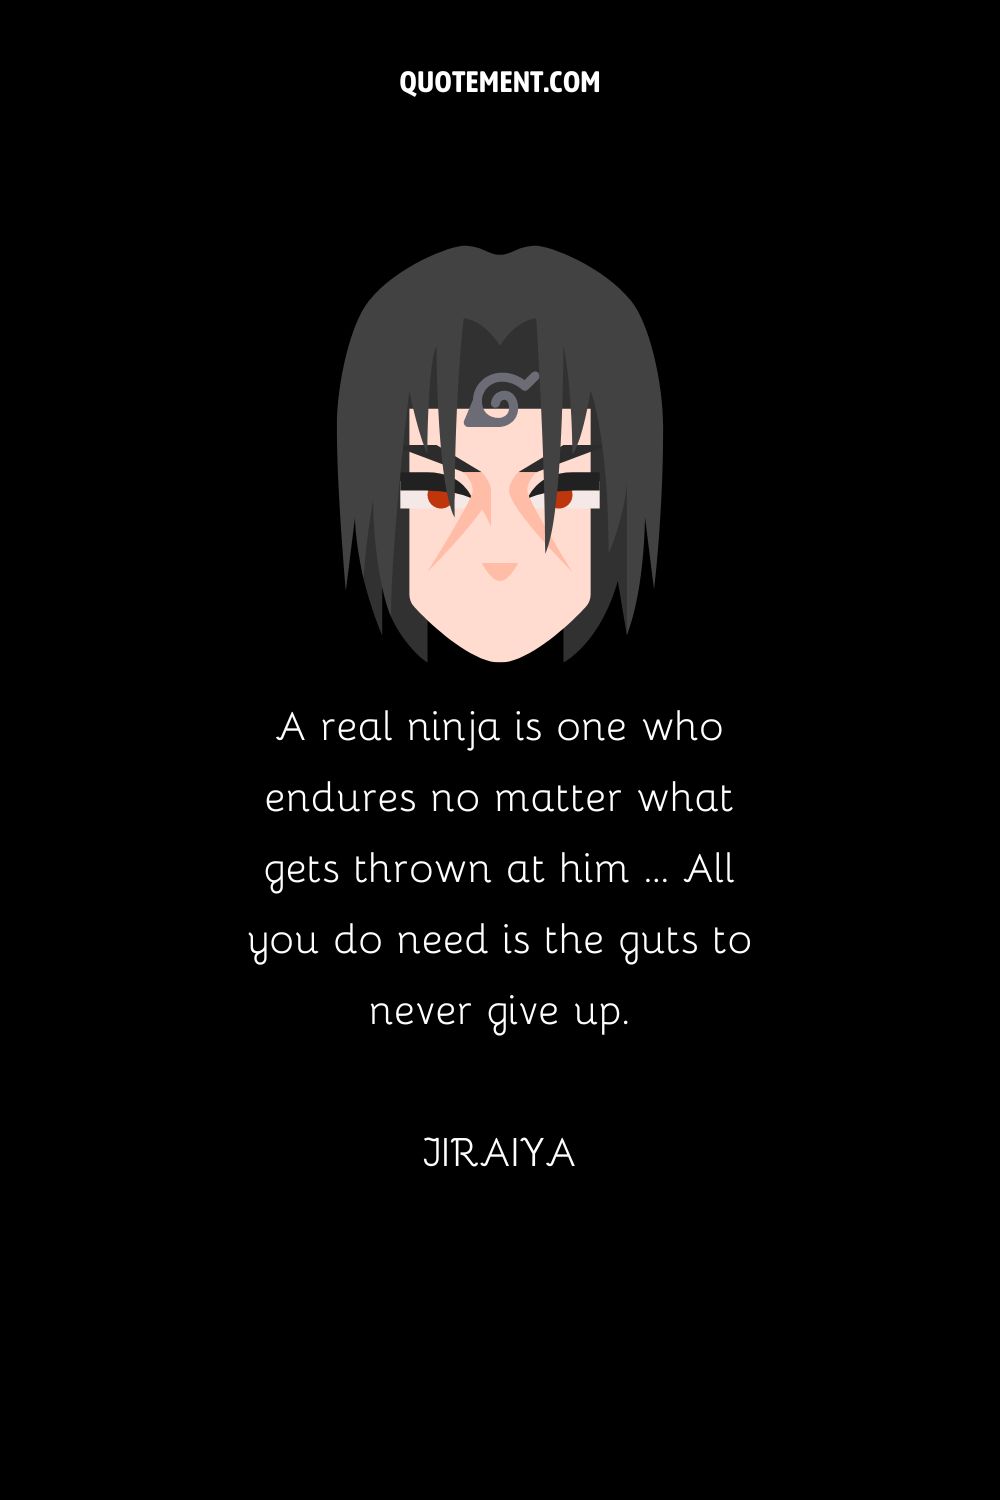 “A real ninja is one who endures no matter what gets thrown at him … All you do need is the guts to never give up.” — Jiraiya